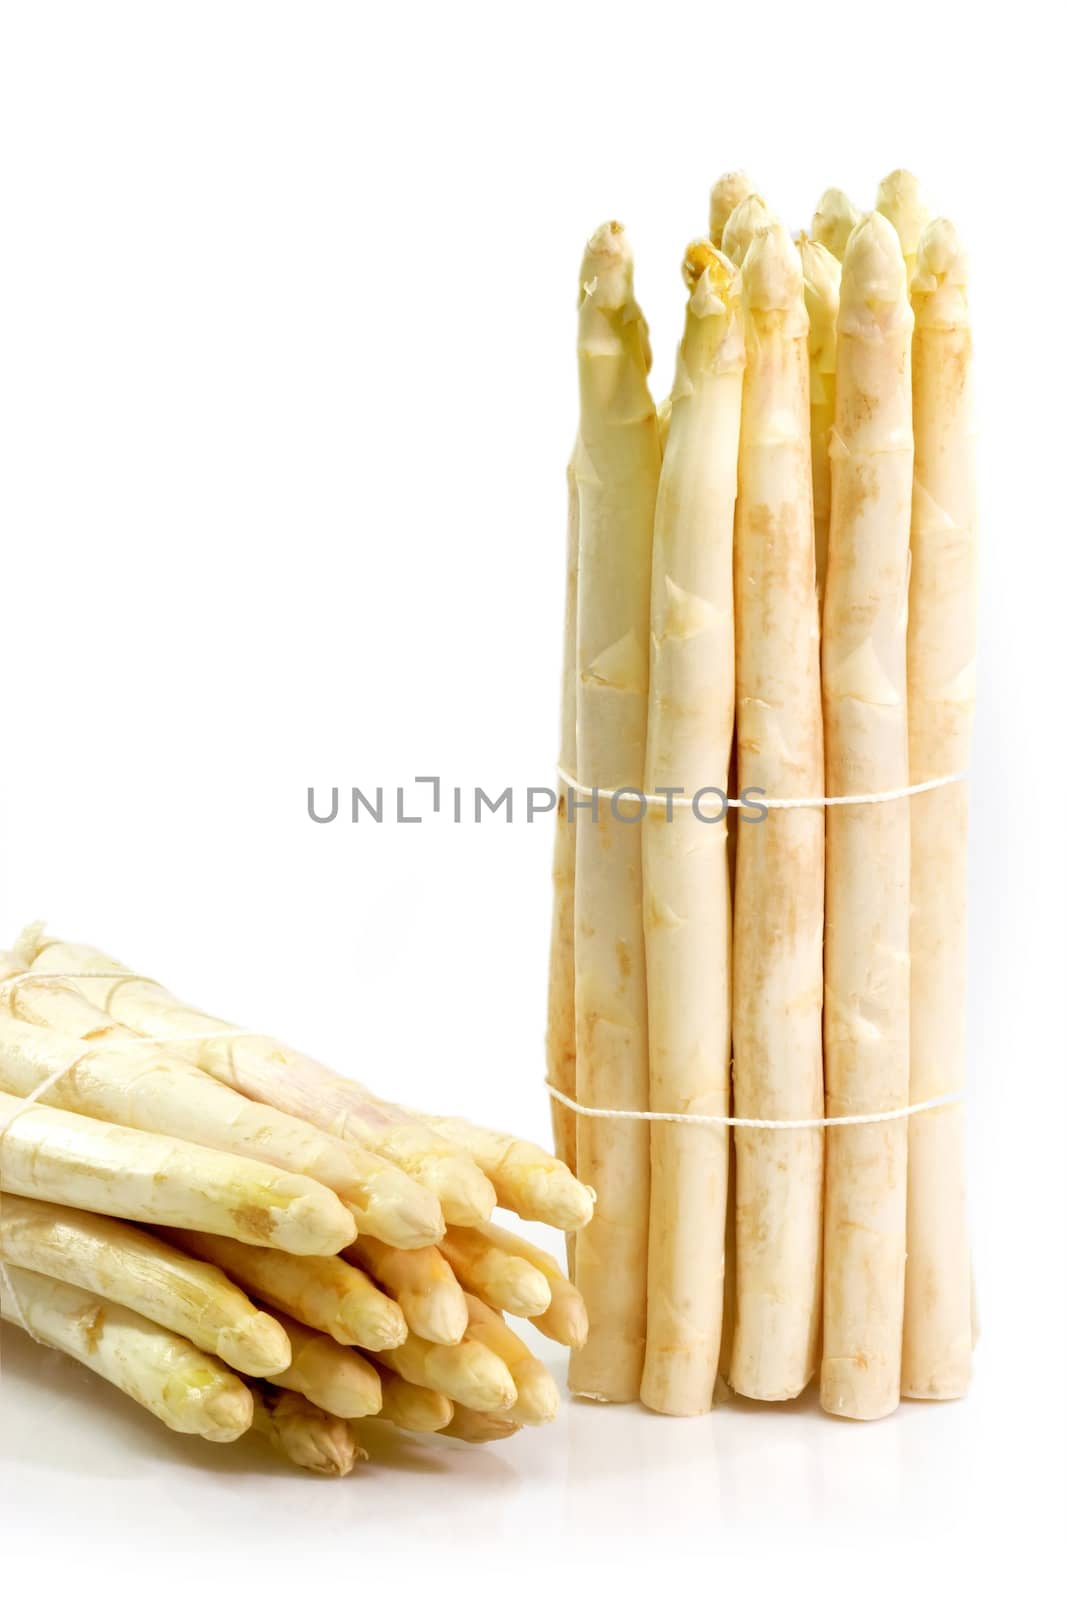 Bundle with fresh asparagus on bright background